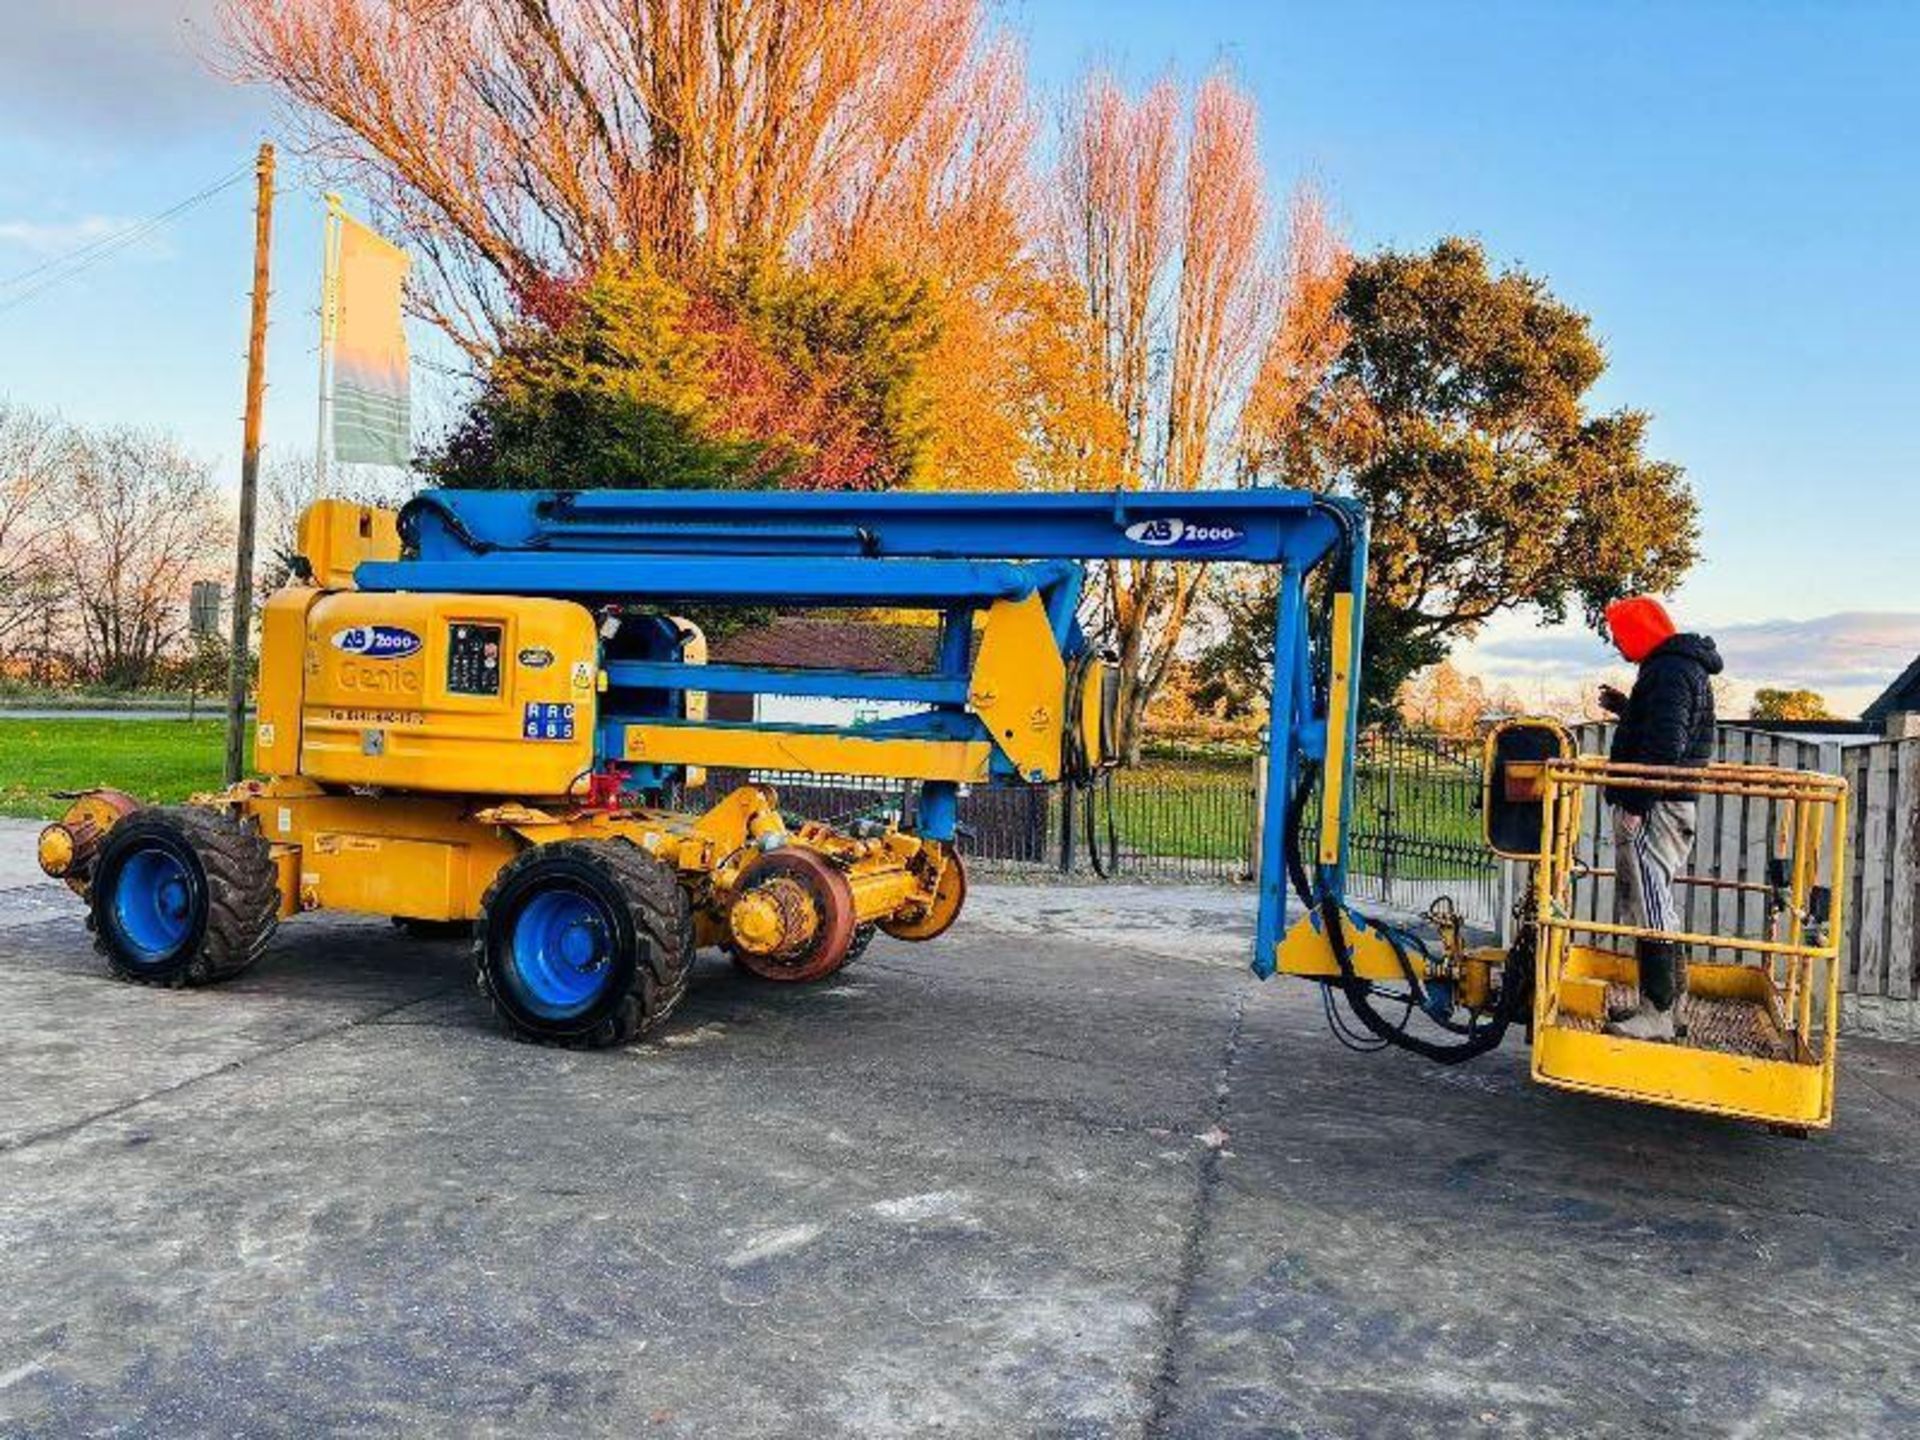 GENIE Z-60/34 4WD ARTICULATED RAIL ROAD BOOM LIFT * 20.3 METER REACH *. - Image 4 of 15